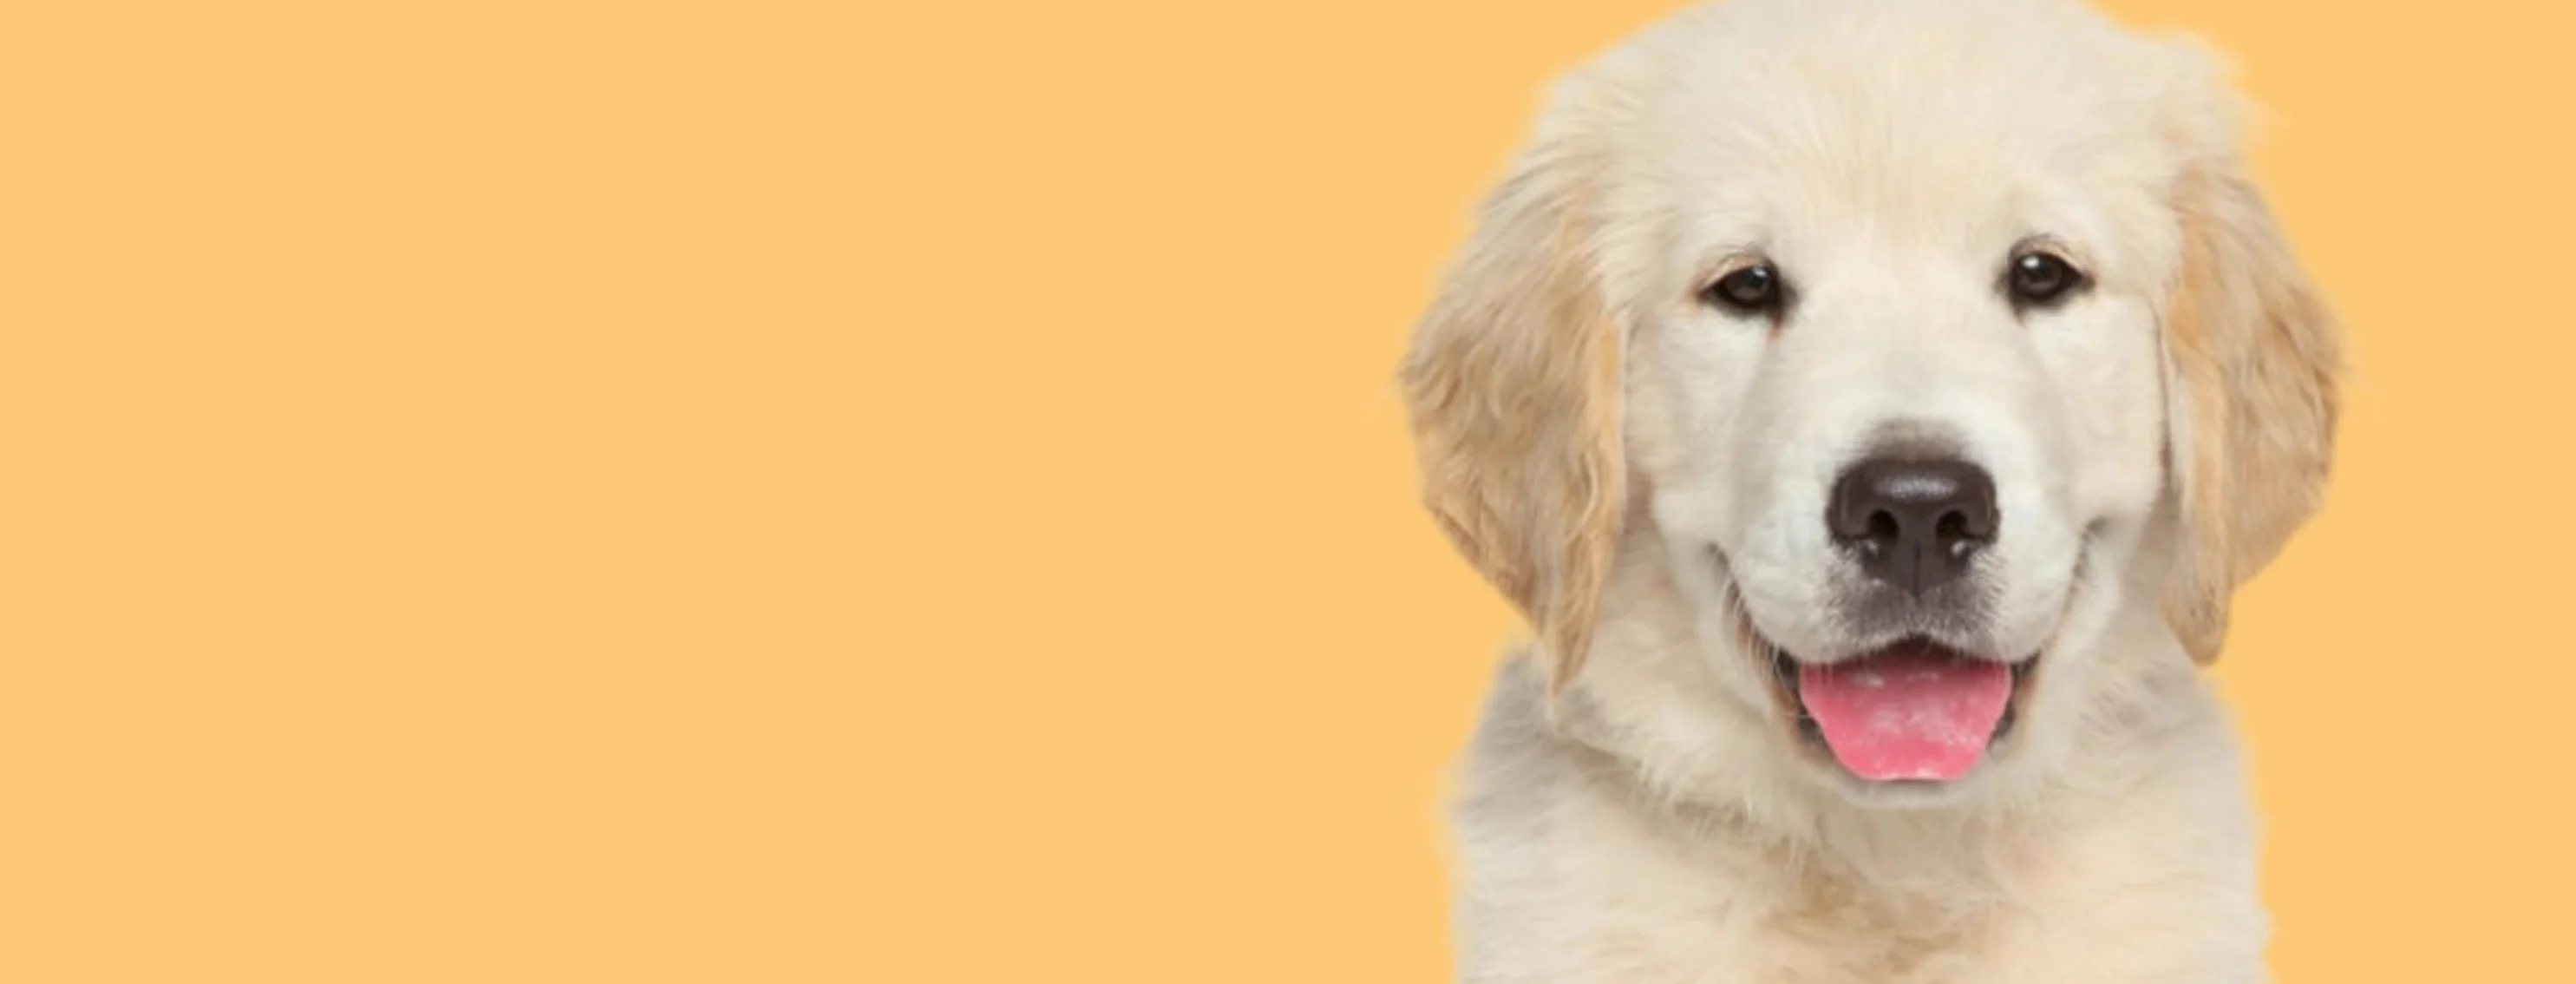 Golden puppy with its tongue out in front of a yellow/orange background 